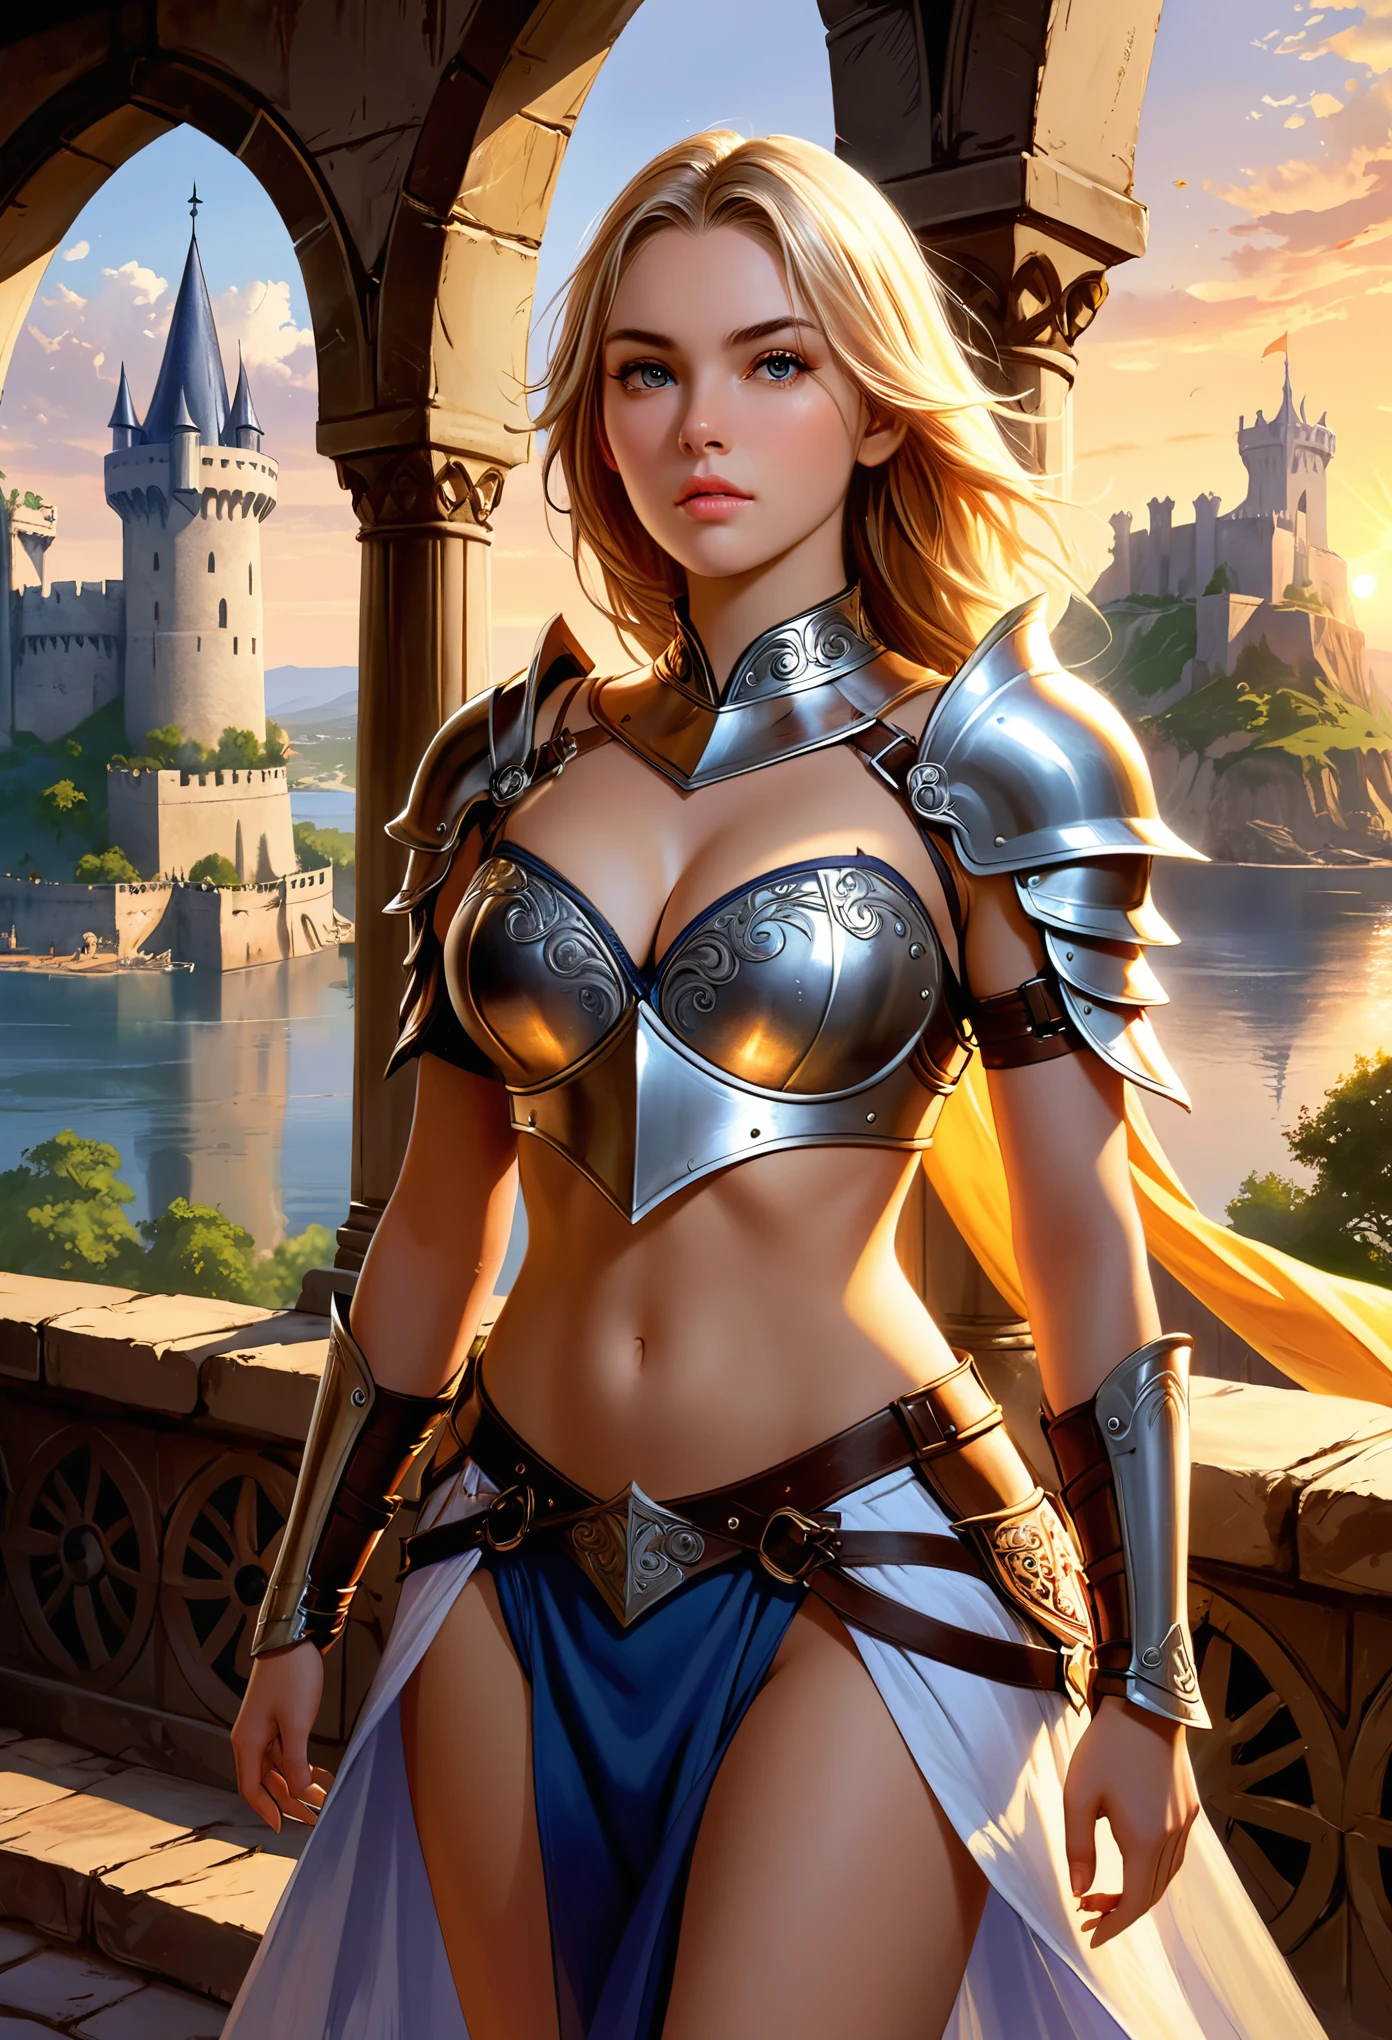 (masterpiece, top quality, best quality, official art, beautiful and aesthetic:1.2),(colorful:1.2),

(1girl:1.2),

beautiful face, pale face, black eyes, a pale warrior princess, woman  shining eyes, serious expression,blade right hand, cleavage, sexy, bikini armor

cape, embroidery,silver_armor, detailed medieval fortress in background, fantasy setting, sunset, sunny day

, fantasy concept art, 